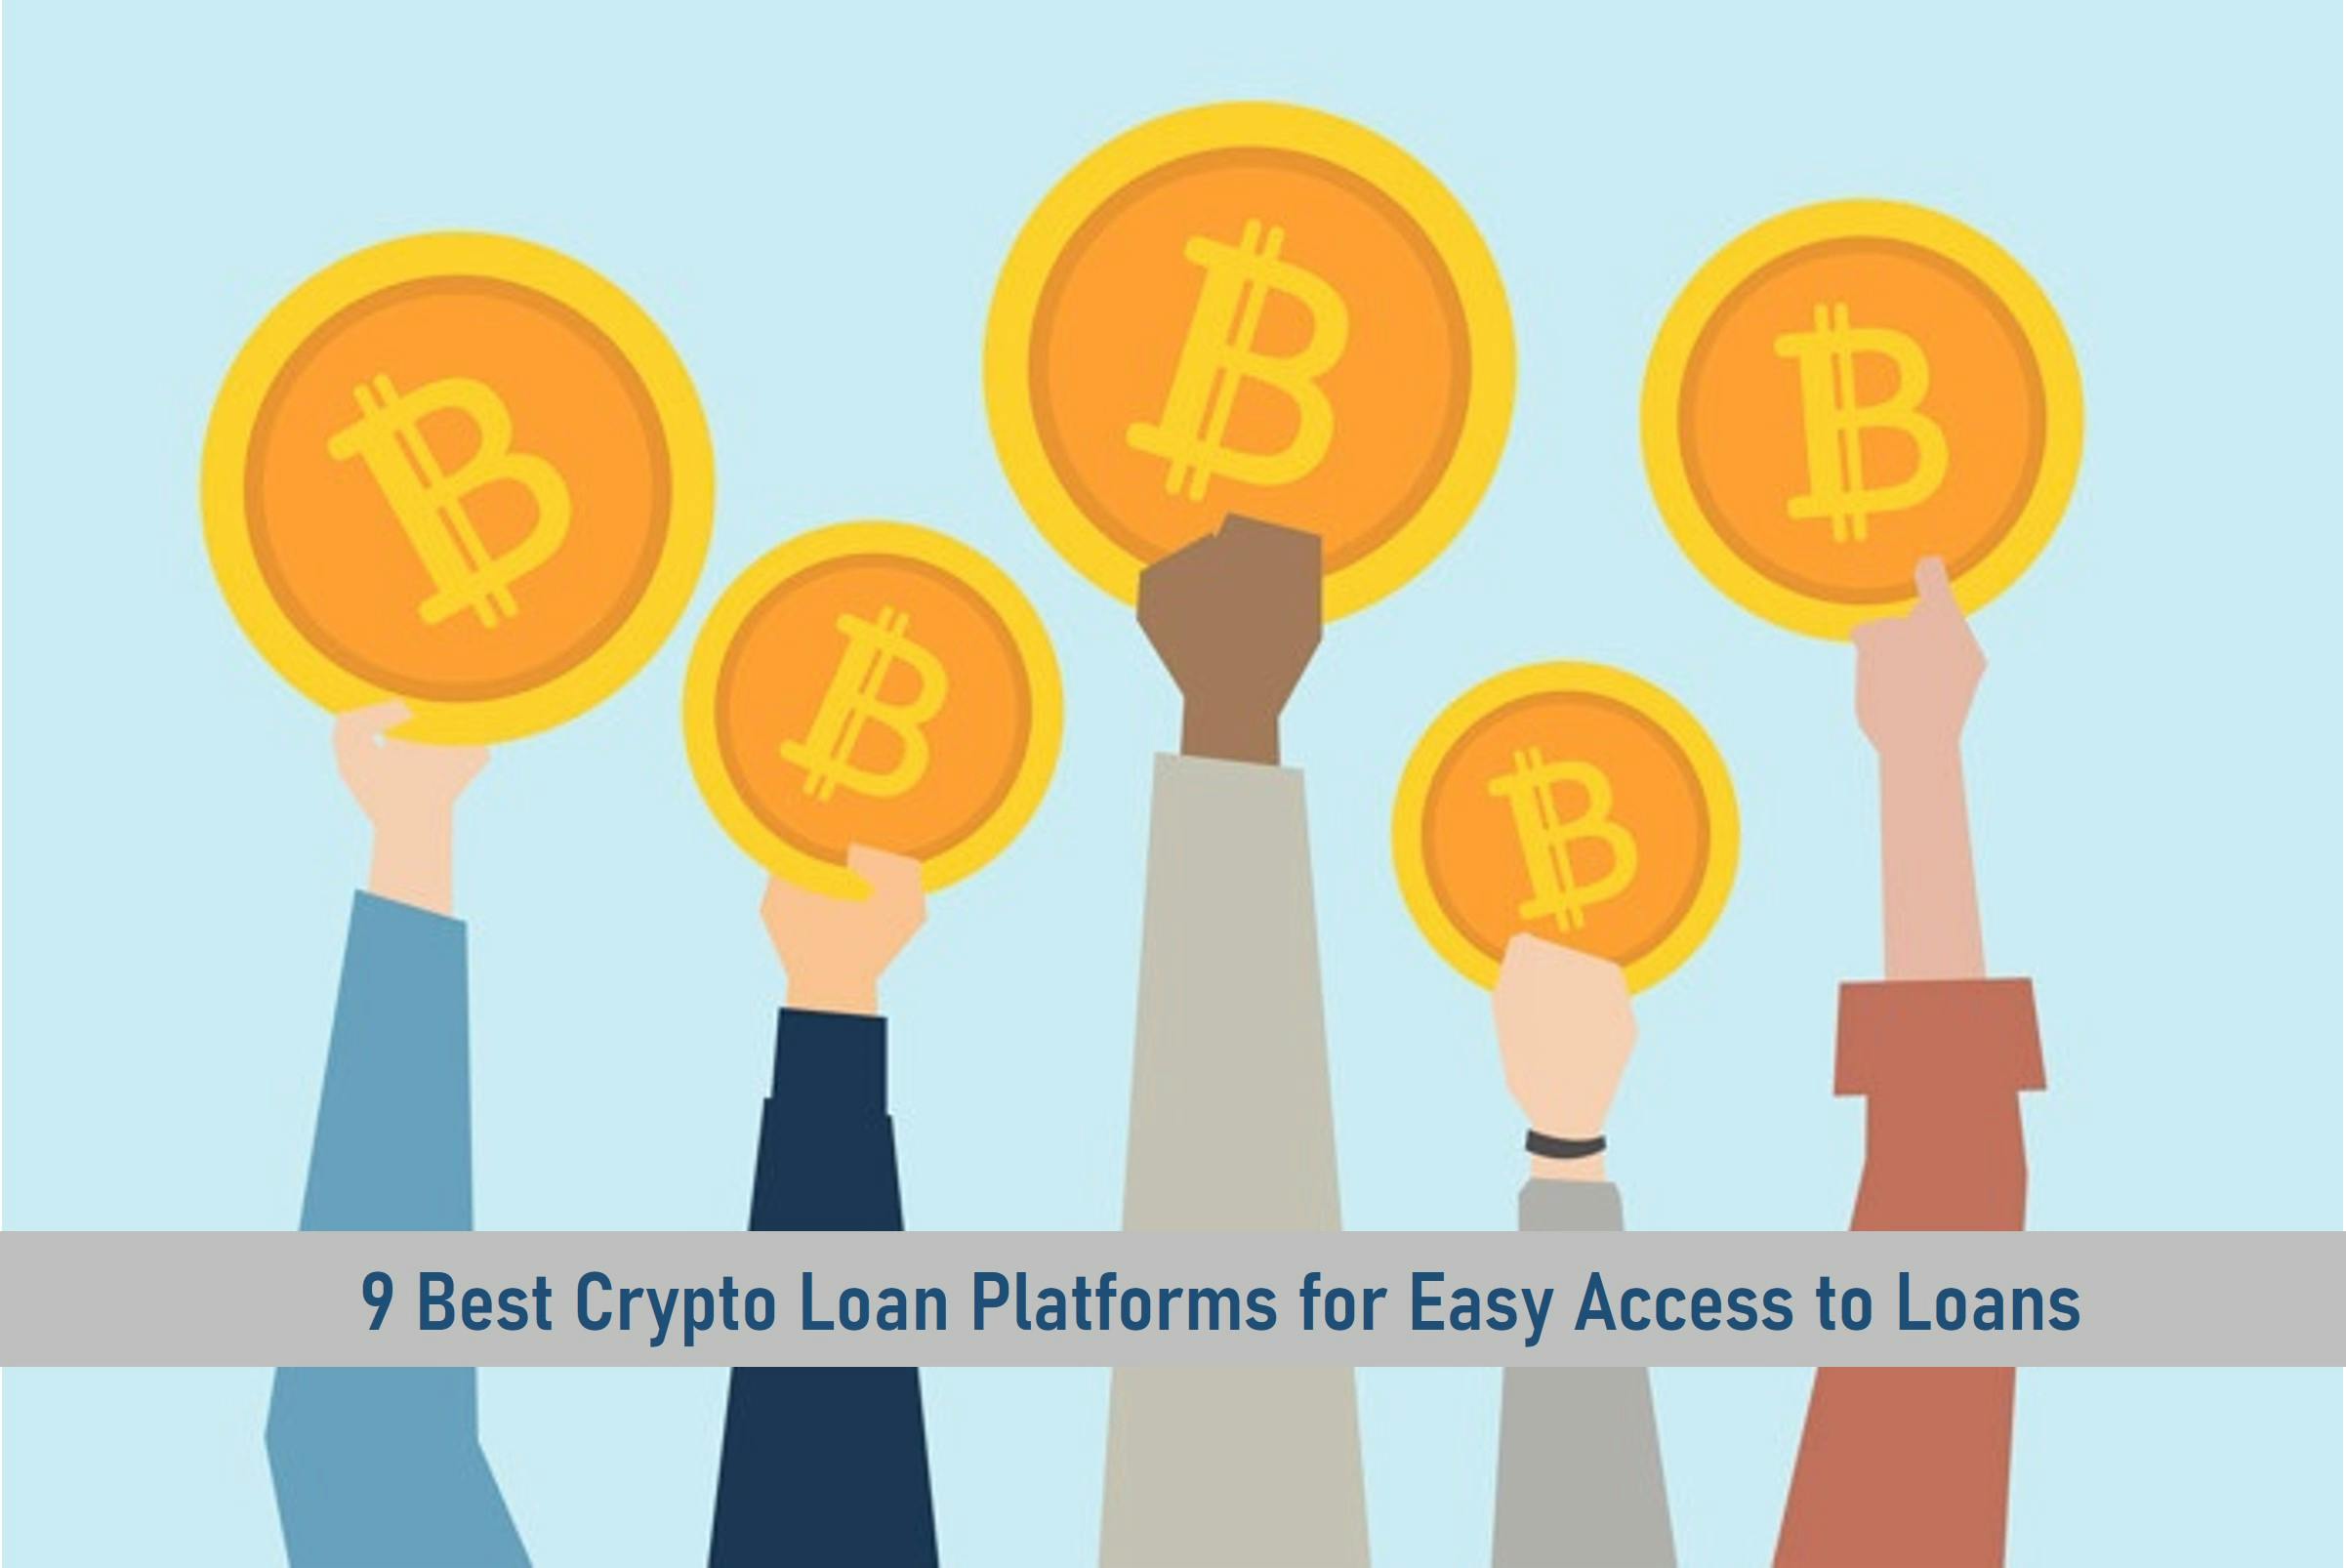 9 Best Crypto Loan Platforms for Easy Access to Loans